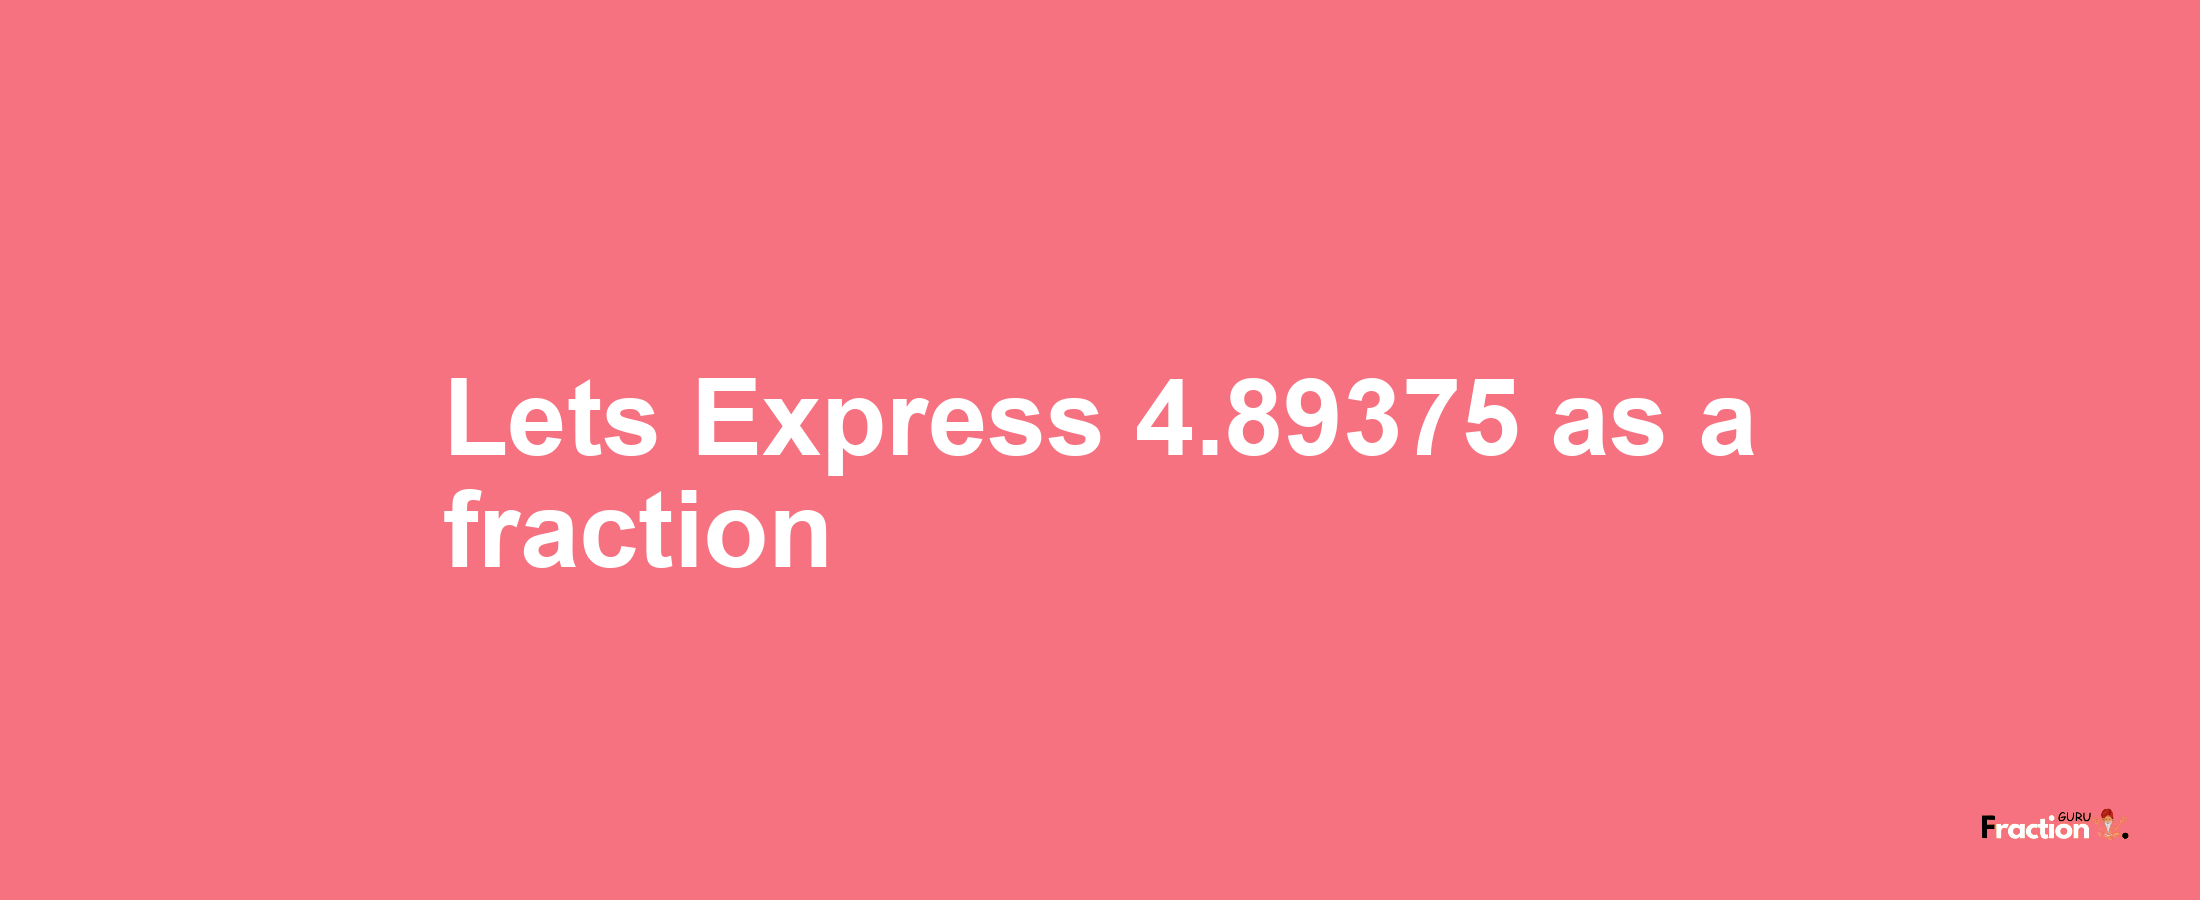 Lets Express 4.89375 as afraction